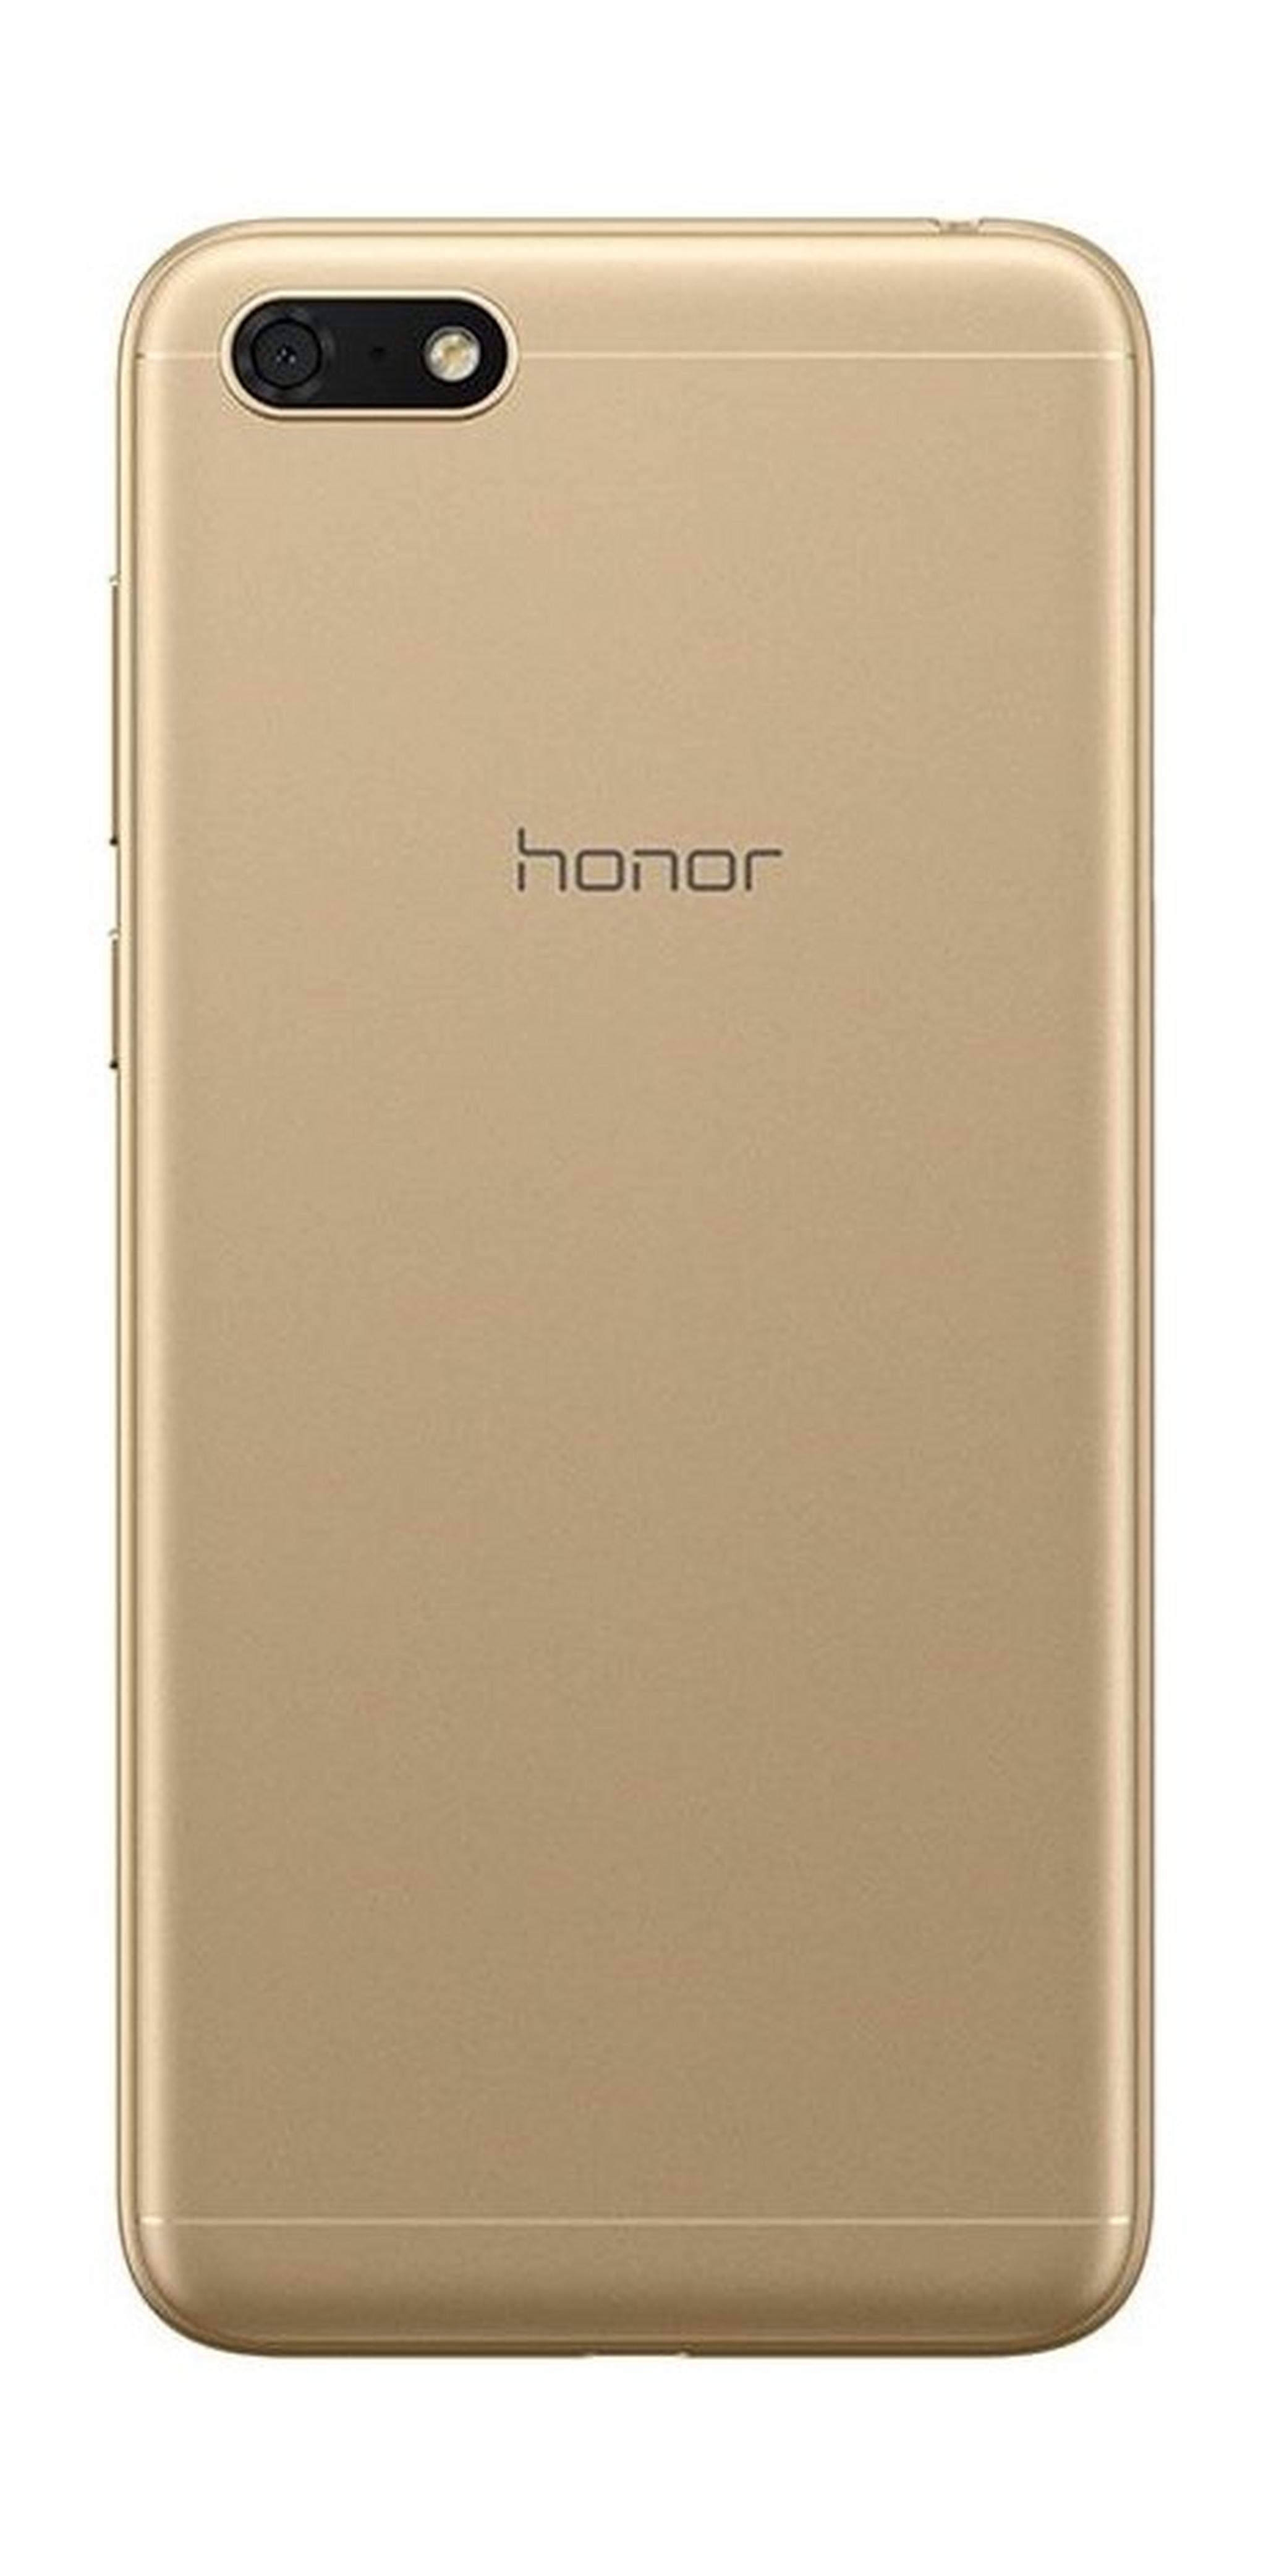 Honor 7S 16GB Phone - Gold